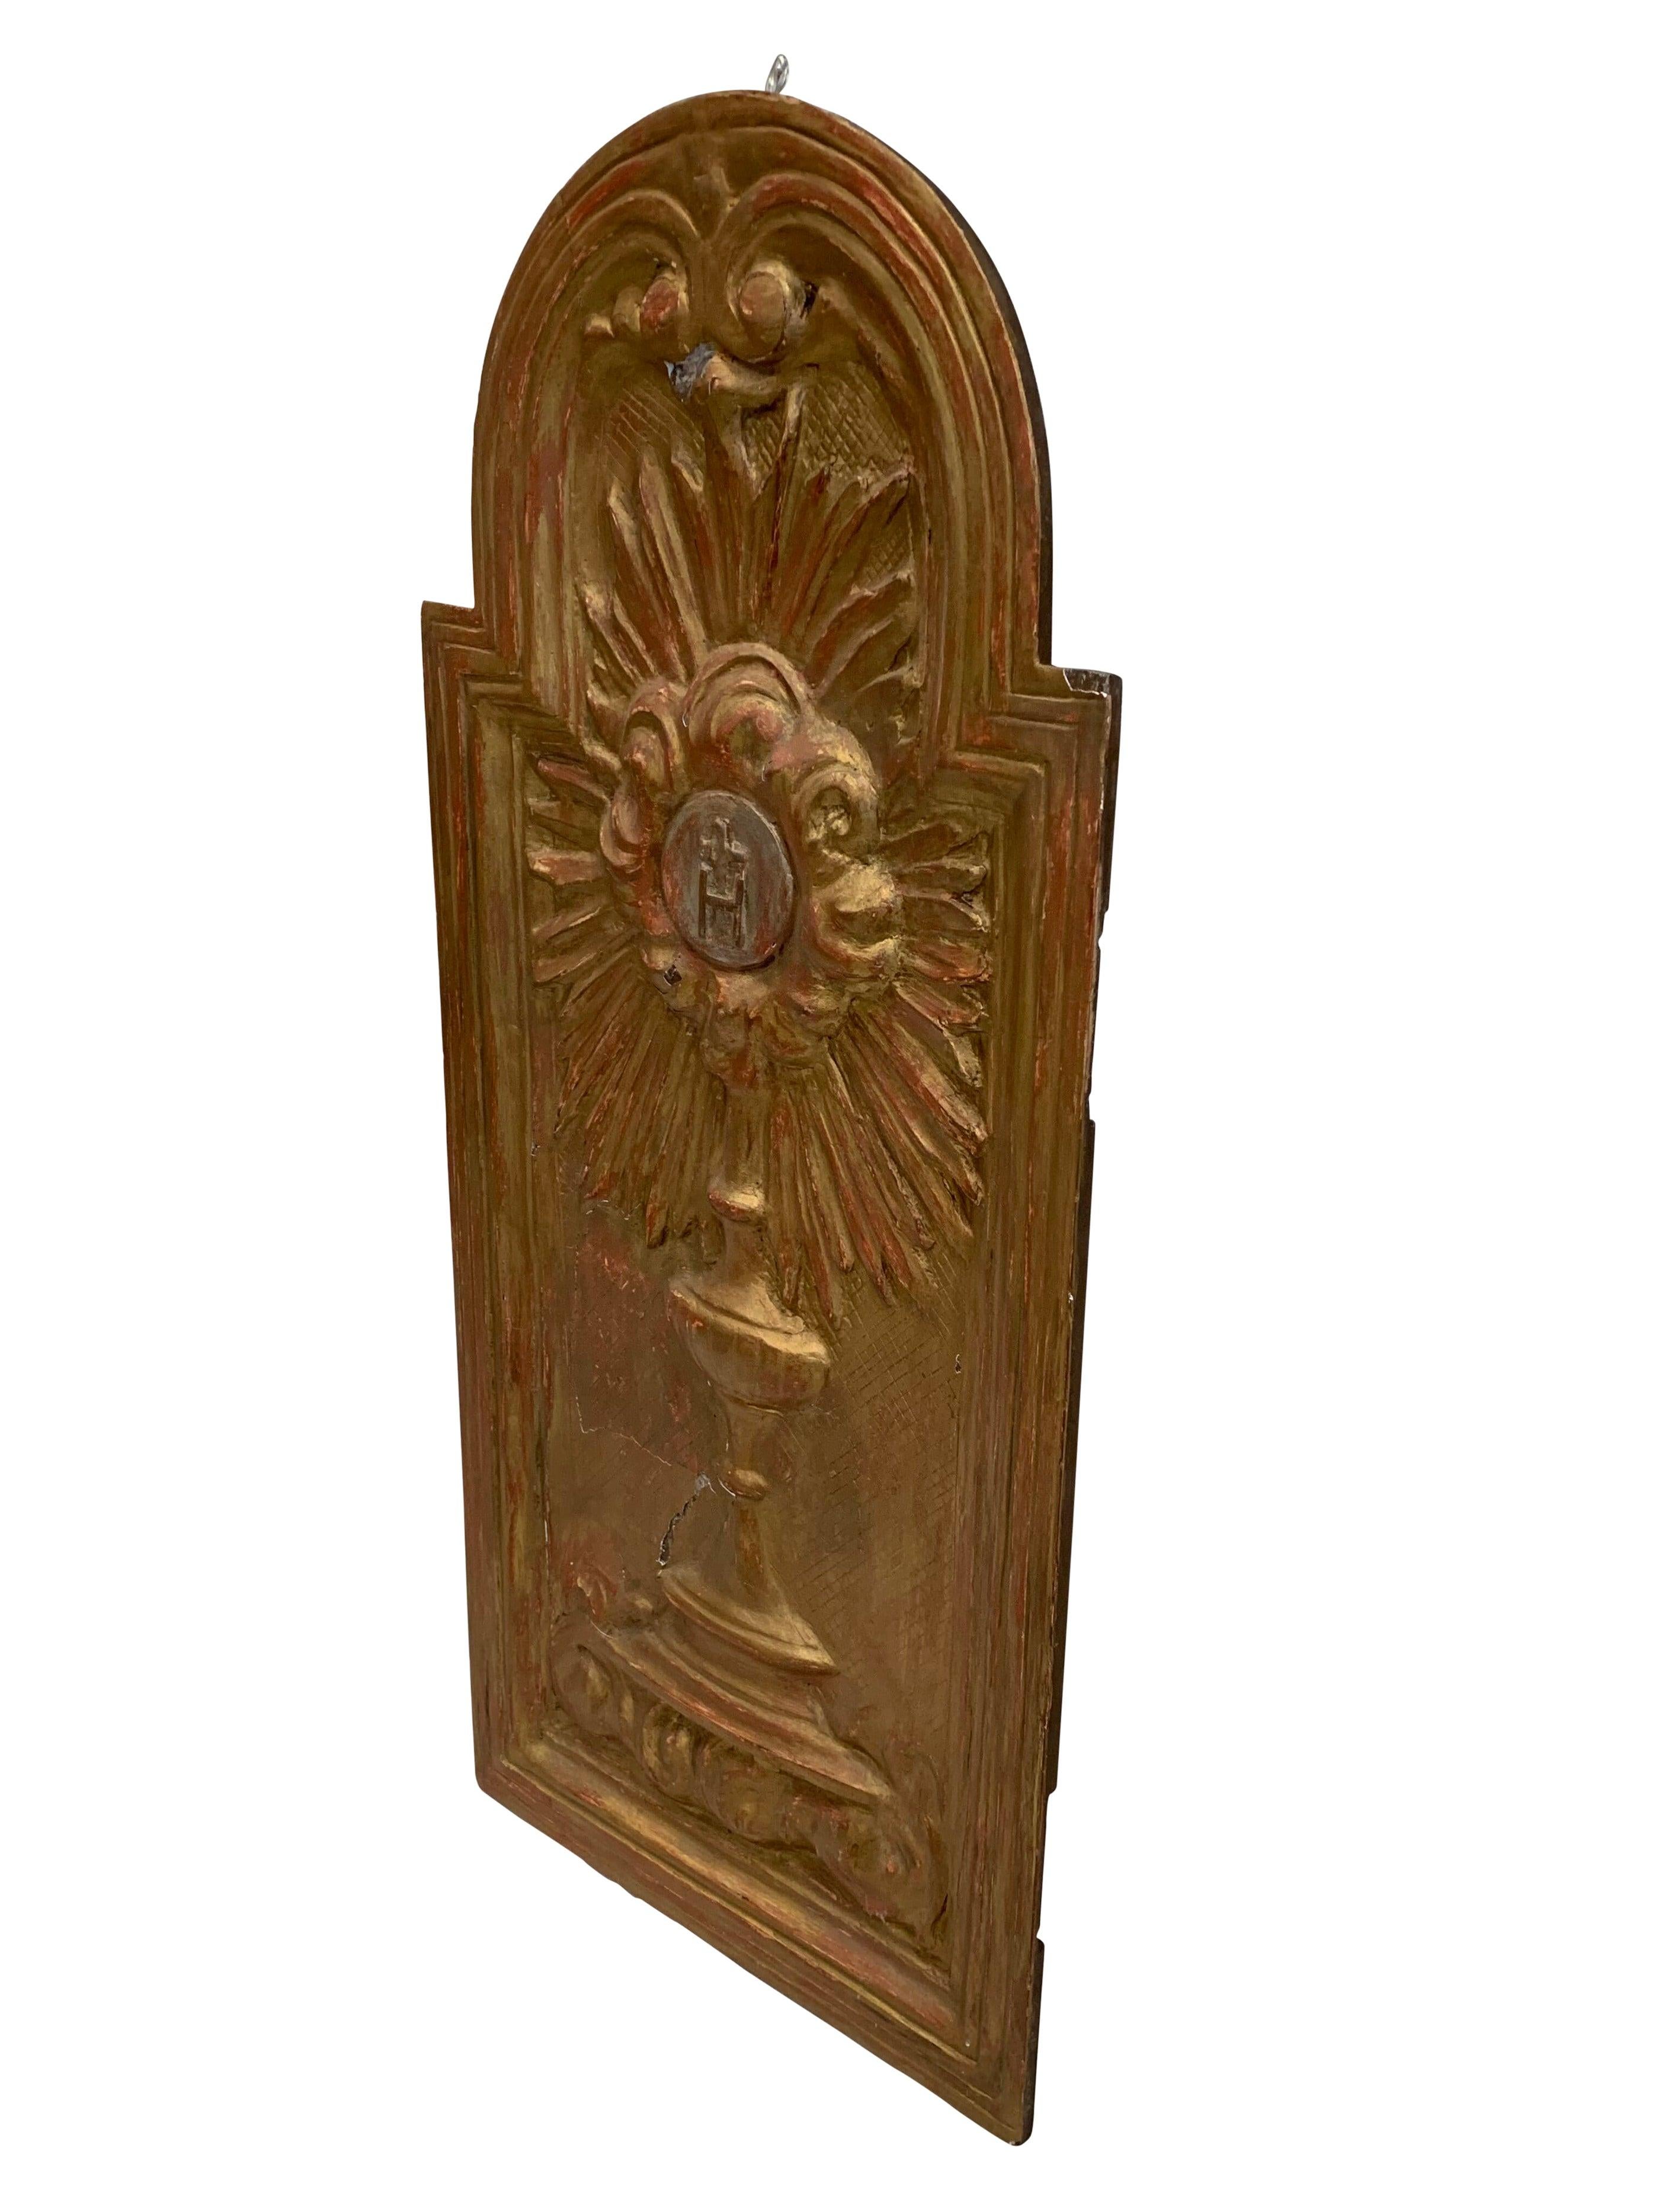 18th Century Italian Tabernacle Door Fragment. Unique piece that can go anywhere. Perfect for a sculpture on the wall in a hallway or niche.